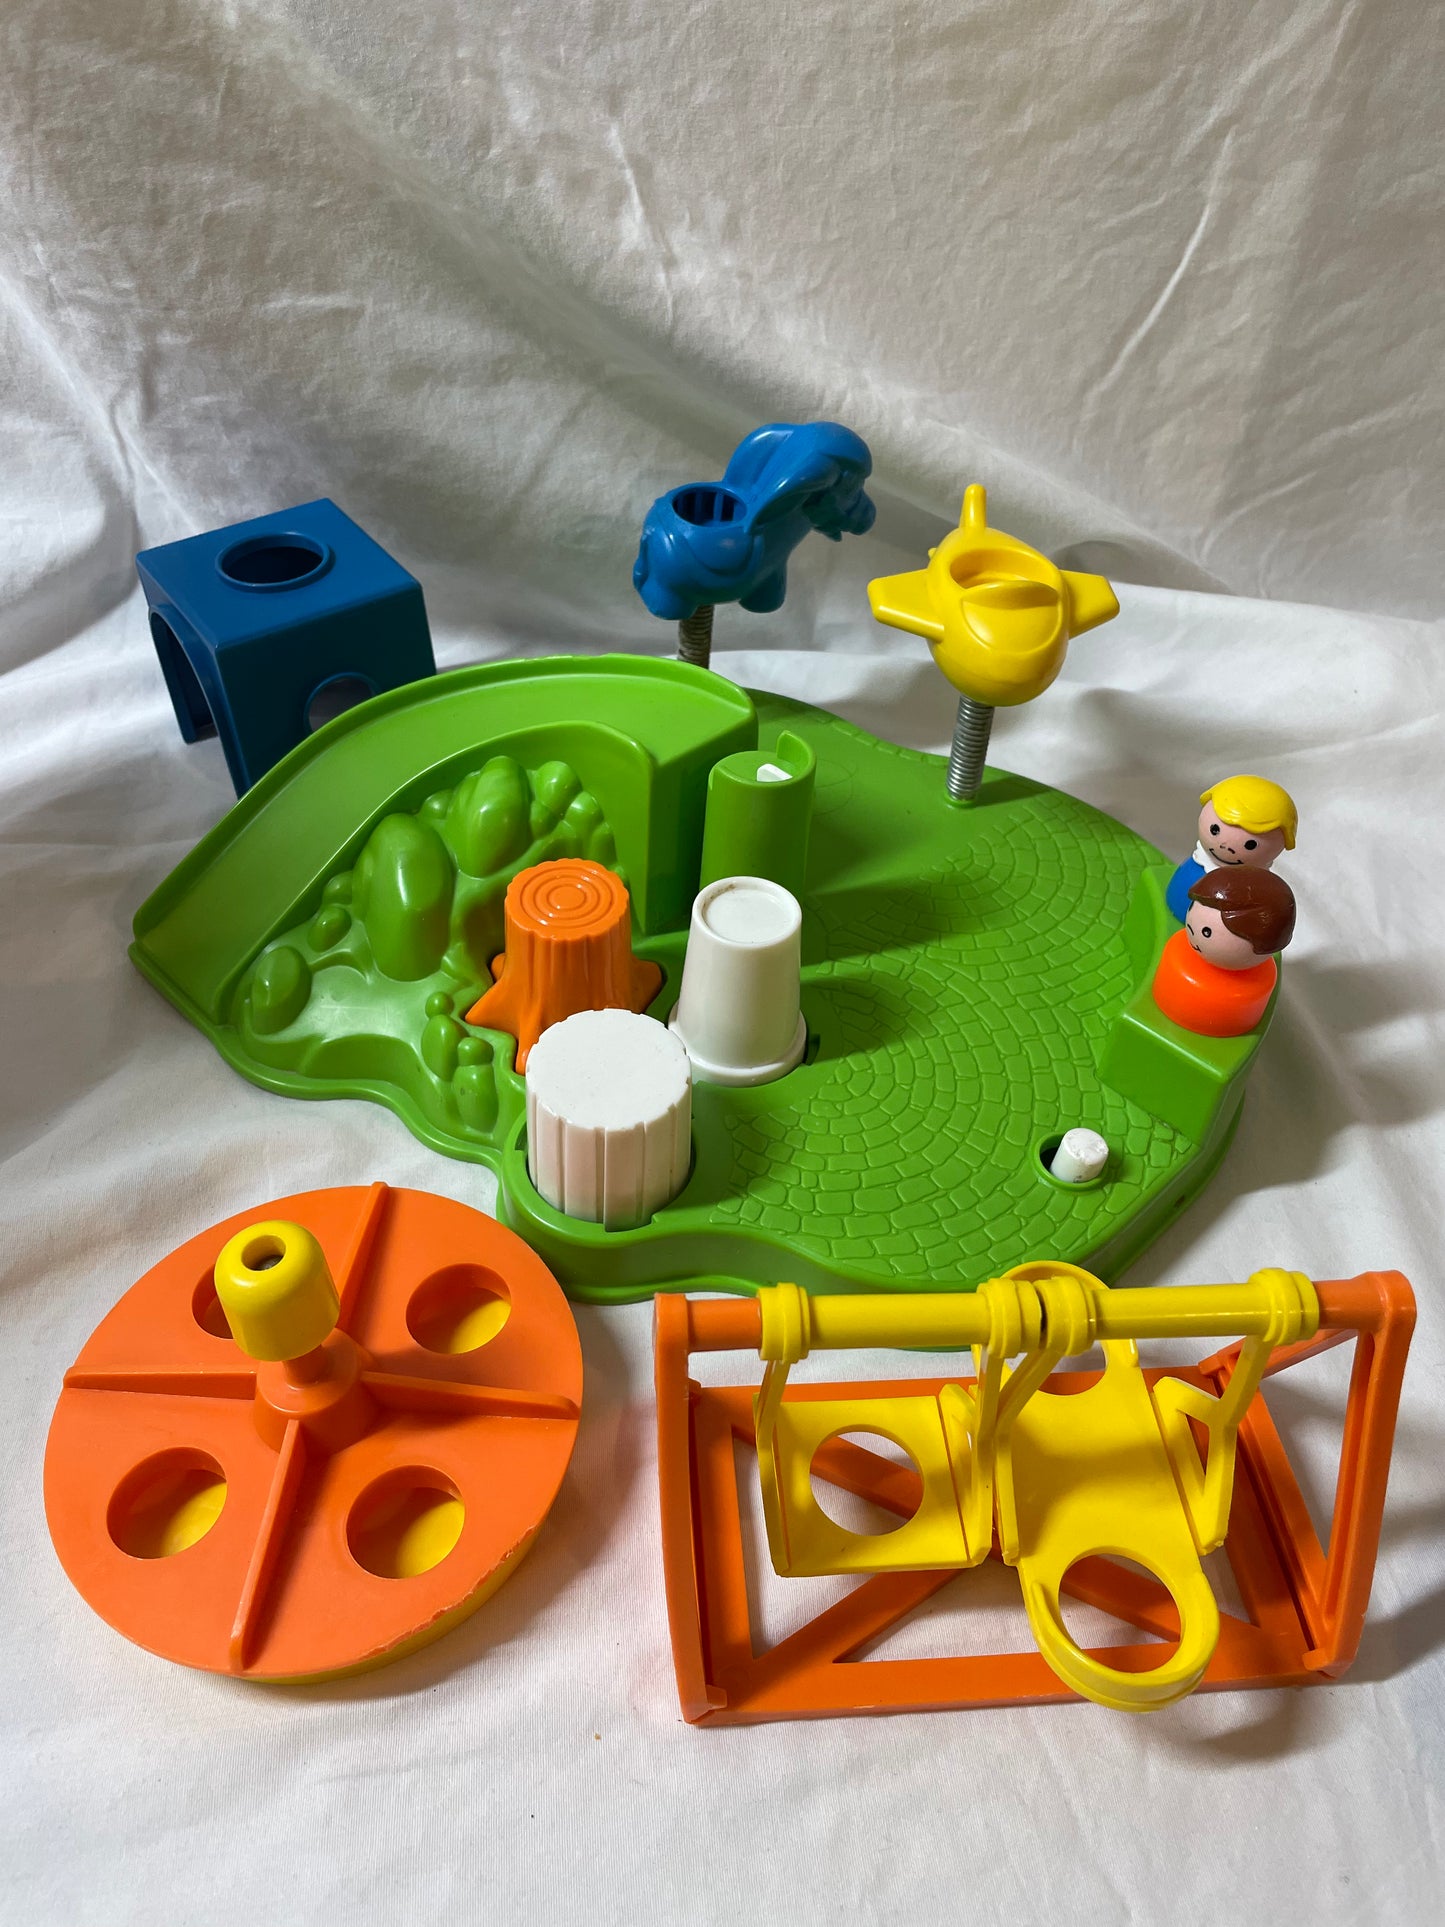 Fisher Price - Little People Playground - 1986 #100179